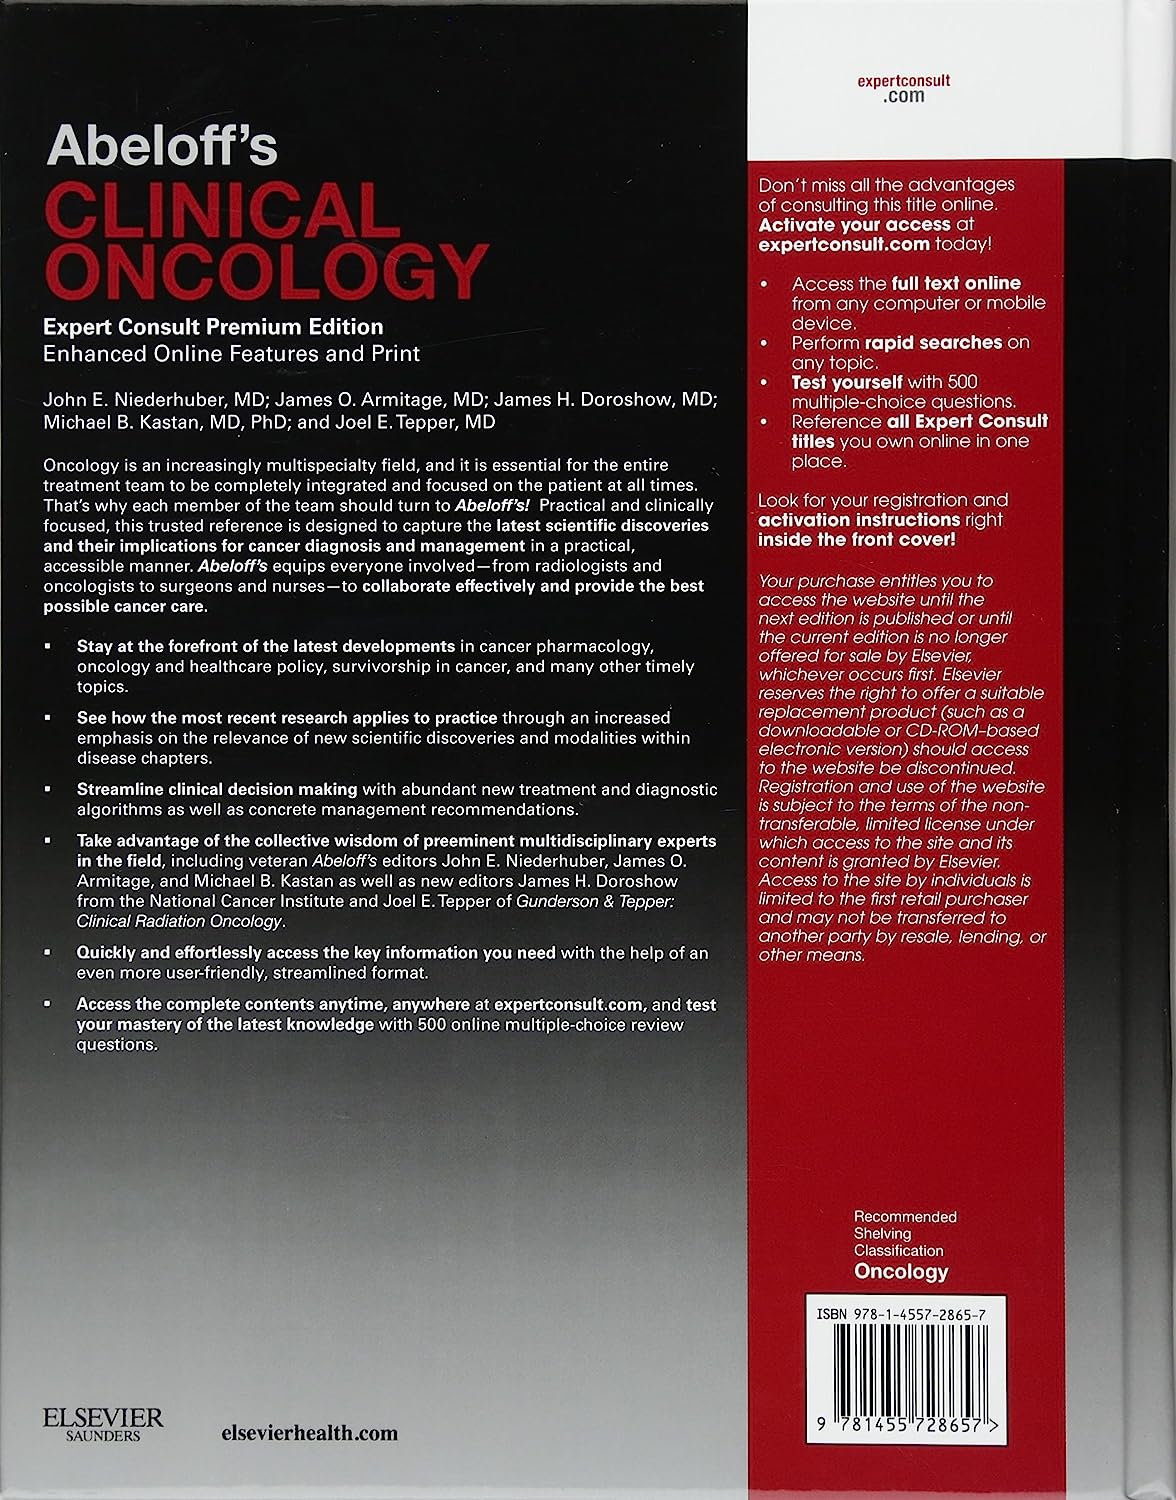 Abeloff's Clinical Oncology: Expert Consult Premium Edition - Enhanced Online Features and Print